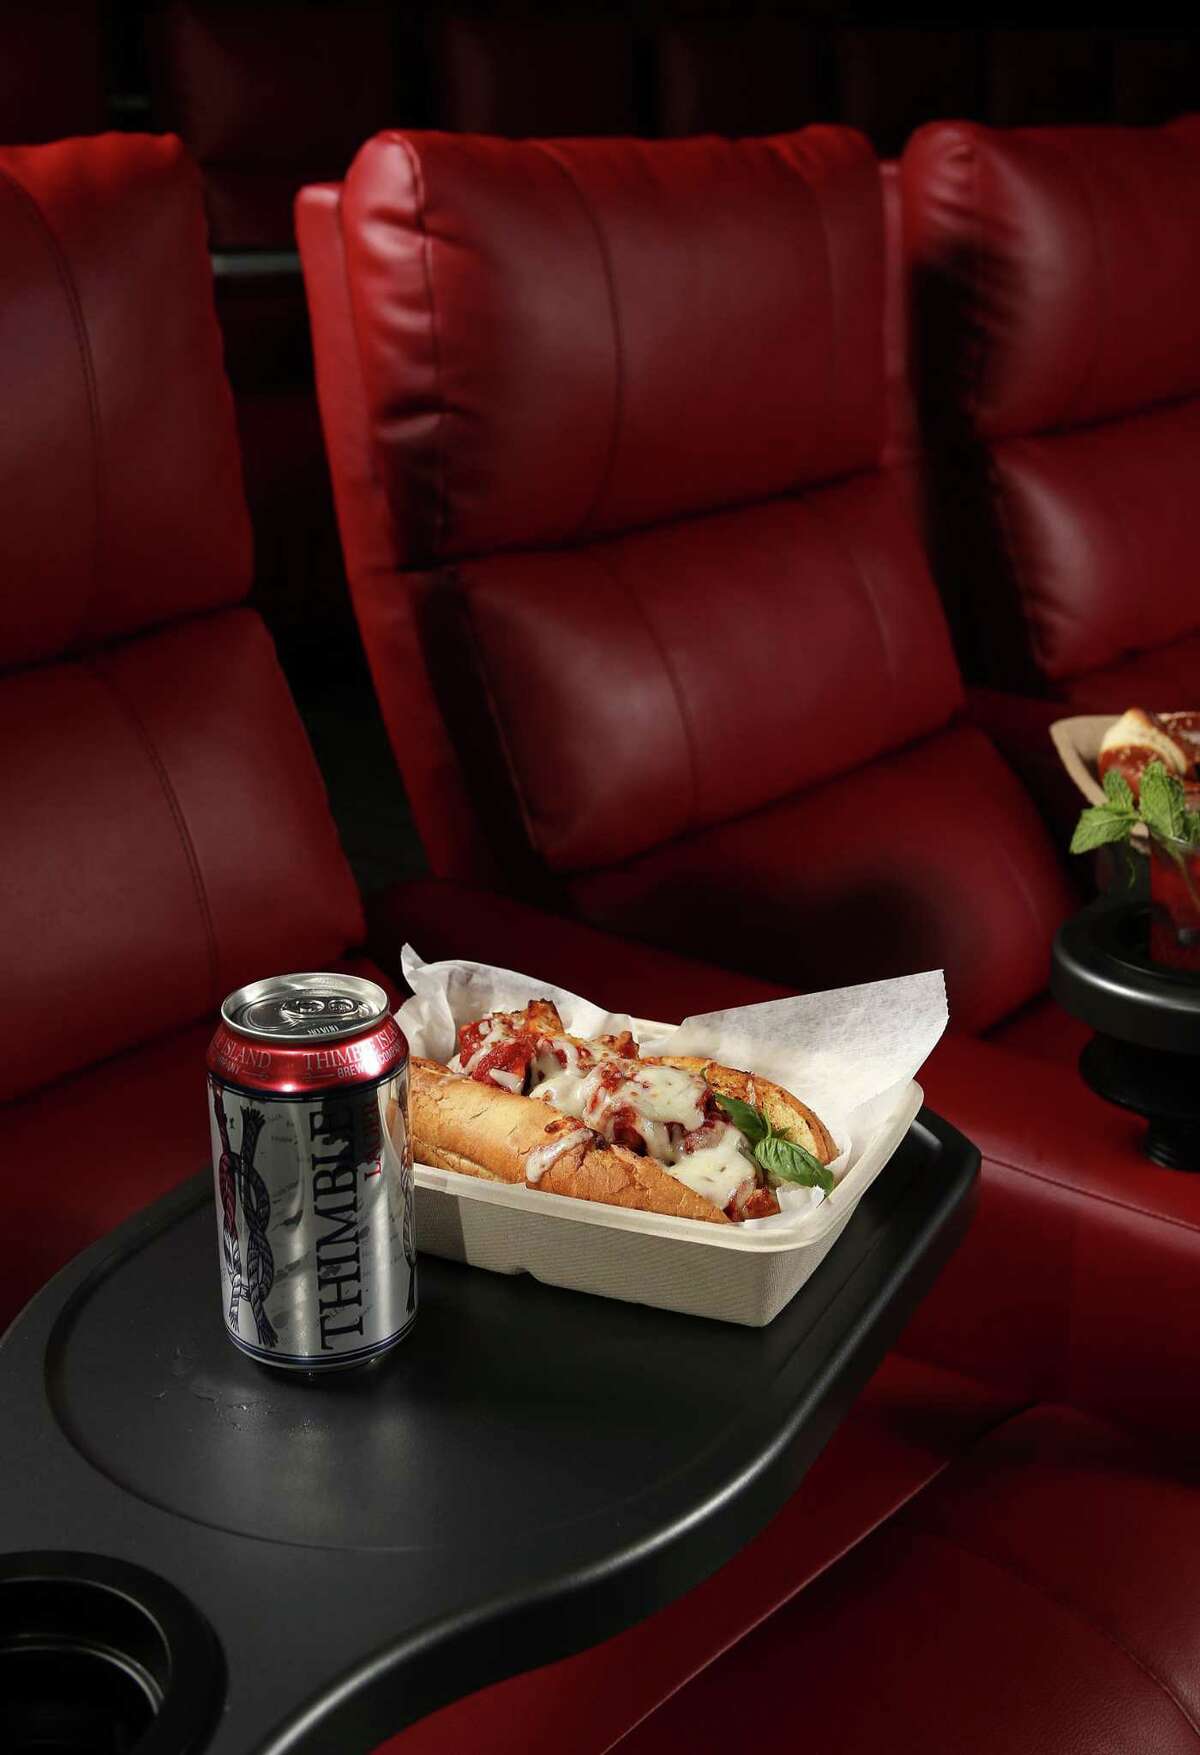 Trays for hot food and plush seats make moviegoers feel at home.